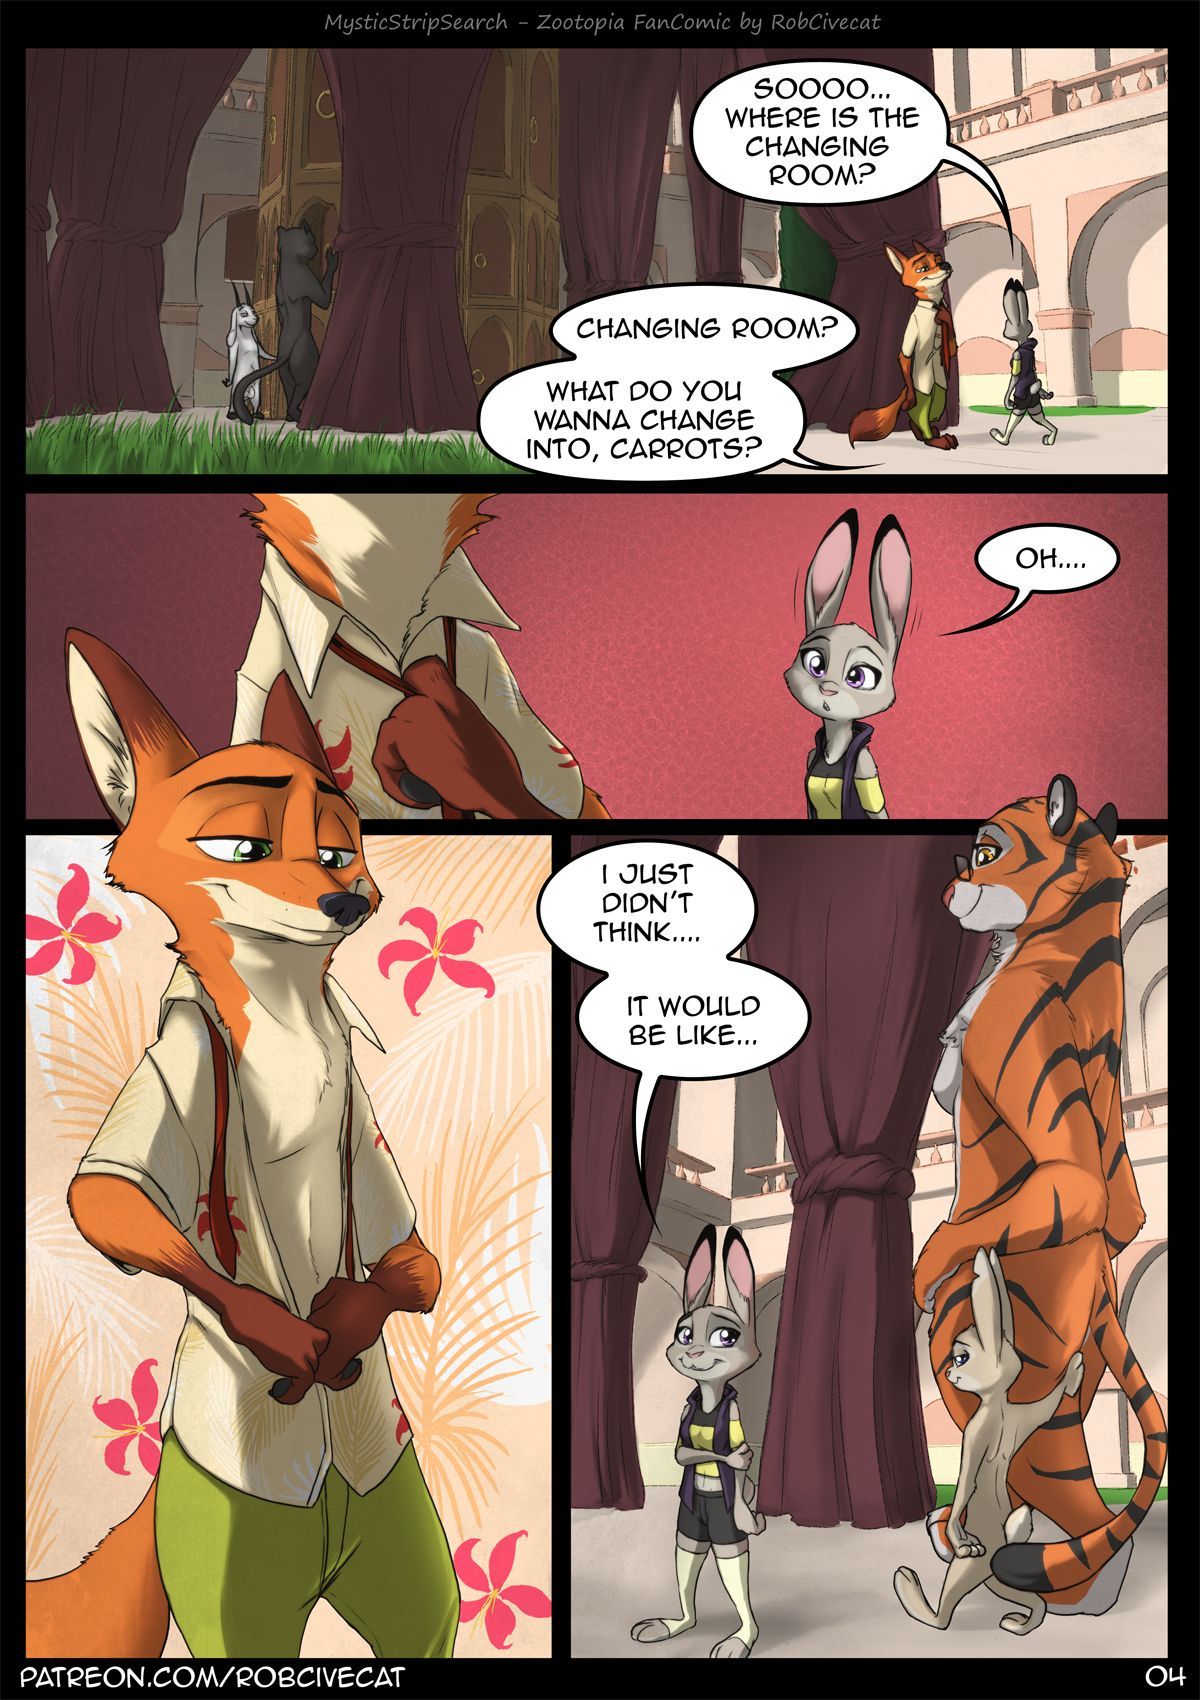 [RobCivecat] Mystic Strip Search (Zootopia) [Ongoing] 5